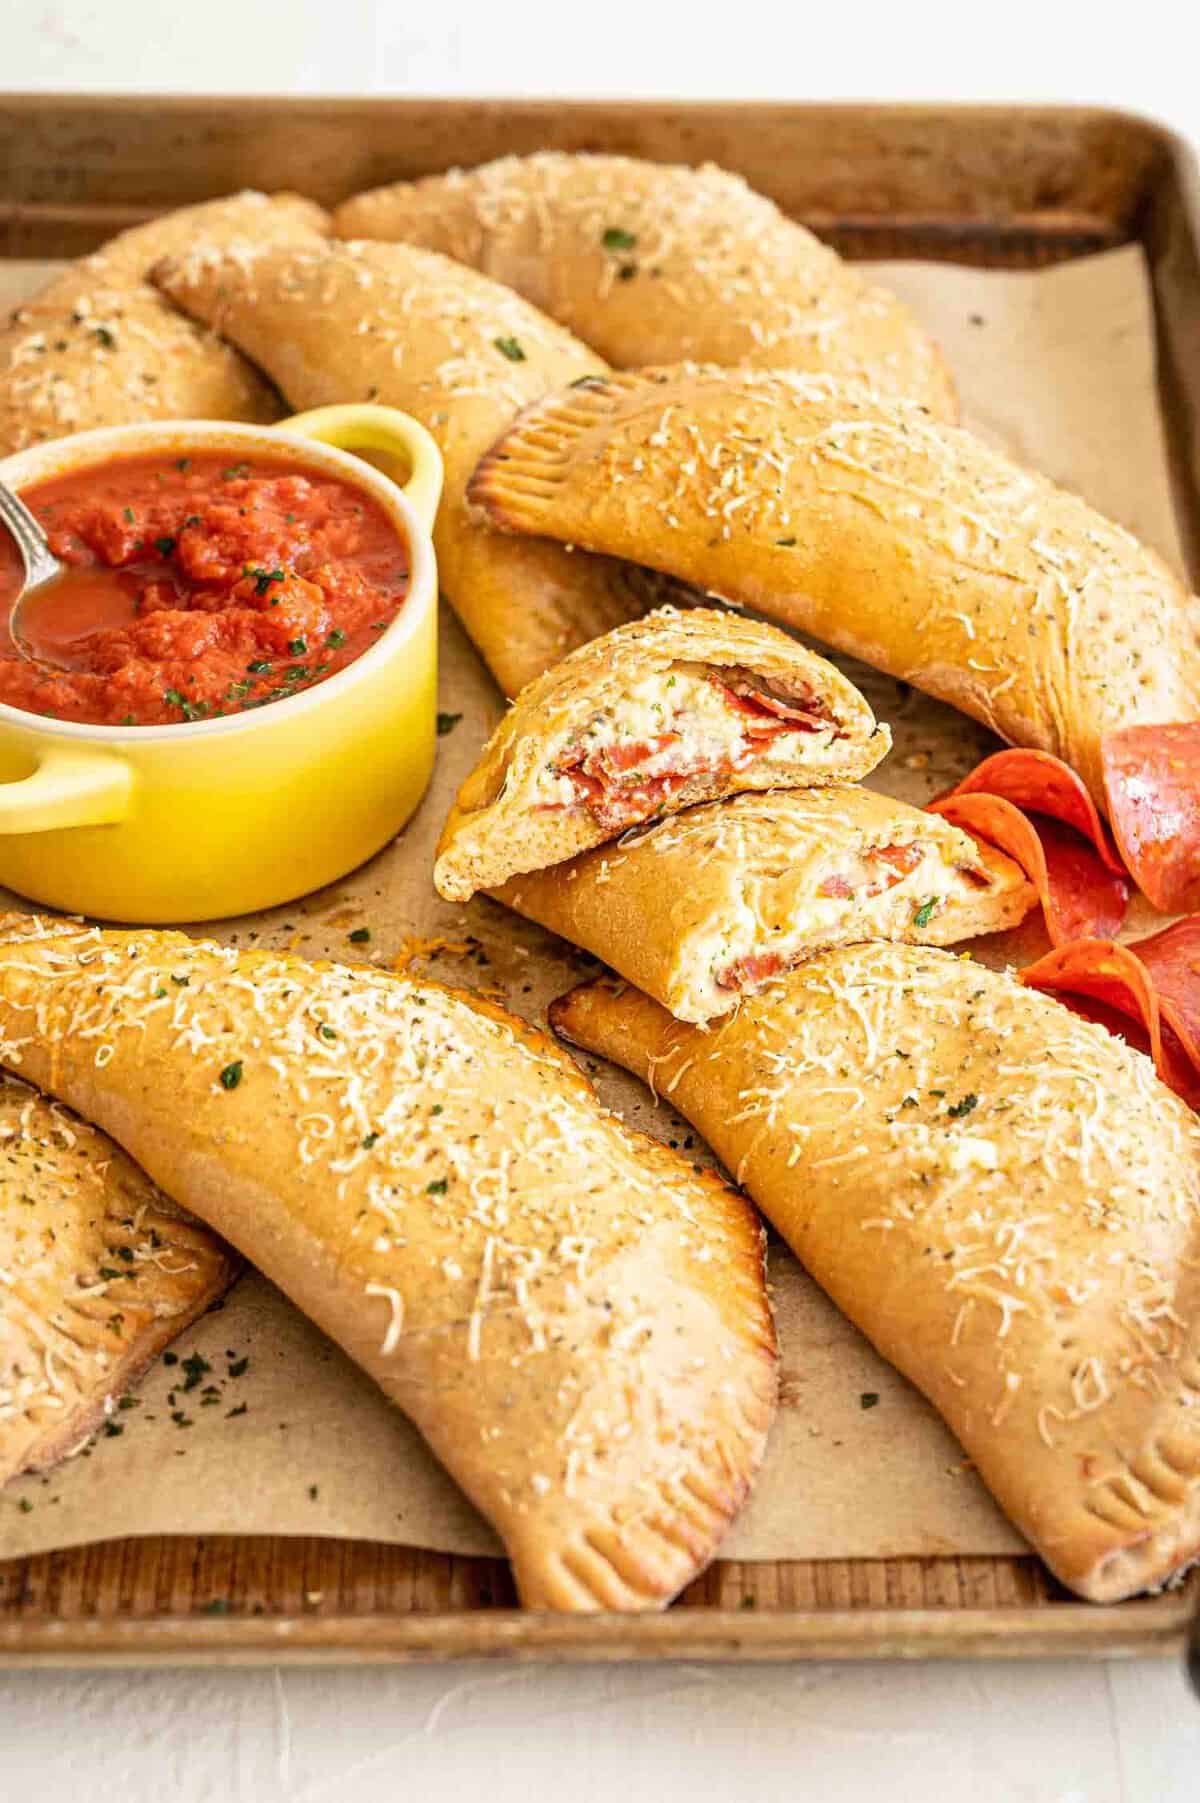 Pepperoni Calzones piled on baking sheet with one cut open to see the cheesy insides and pepperoni slices.